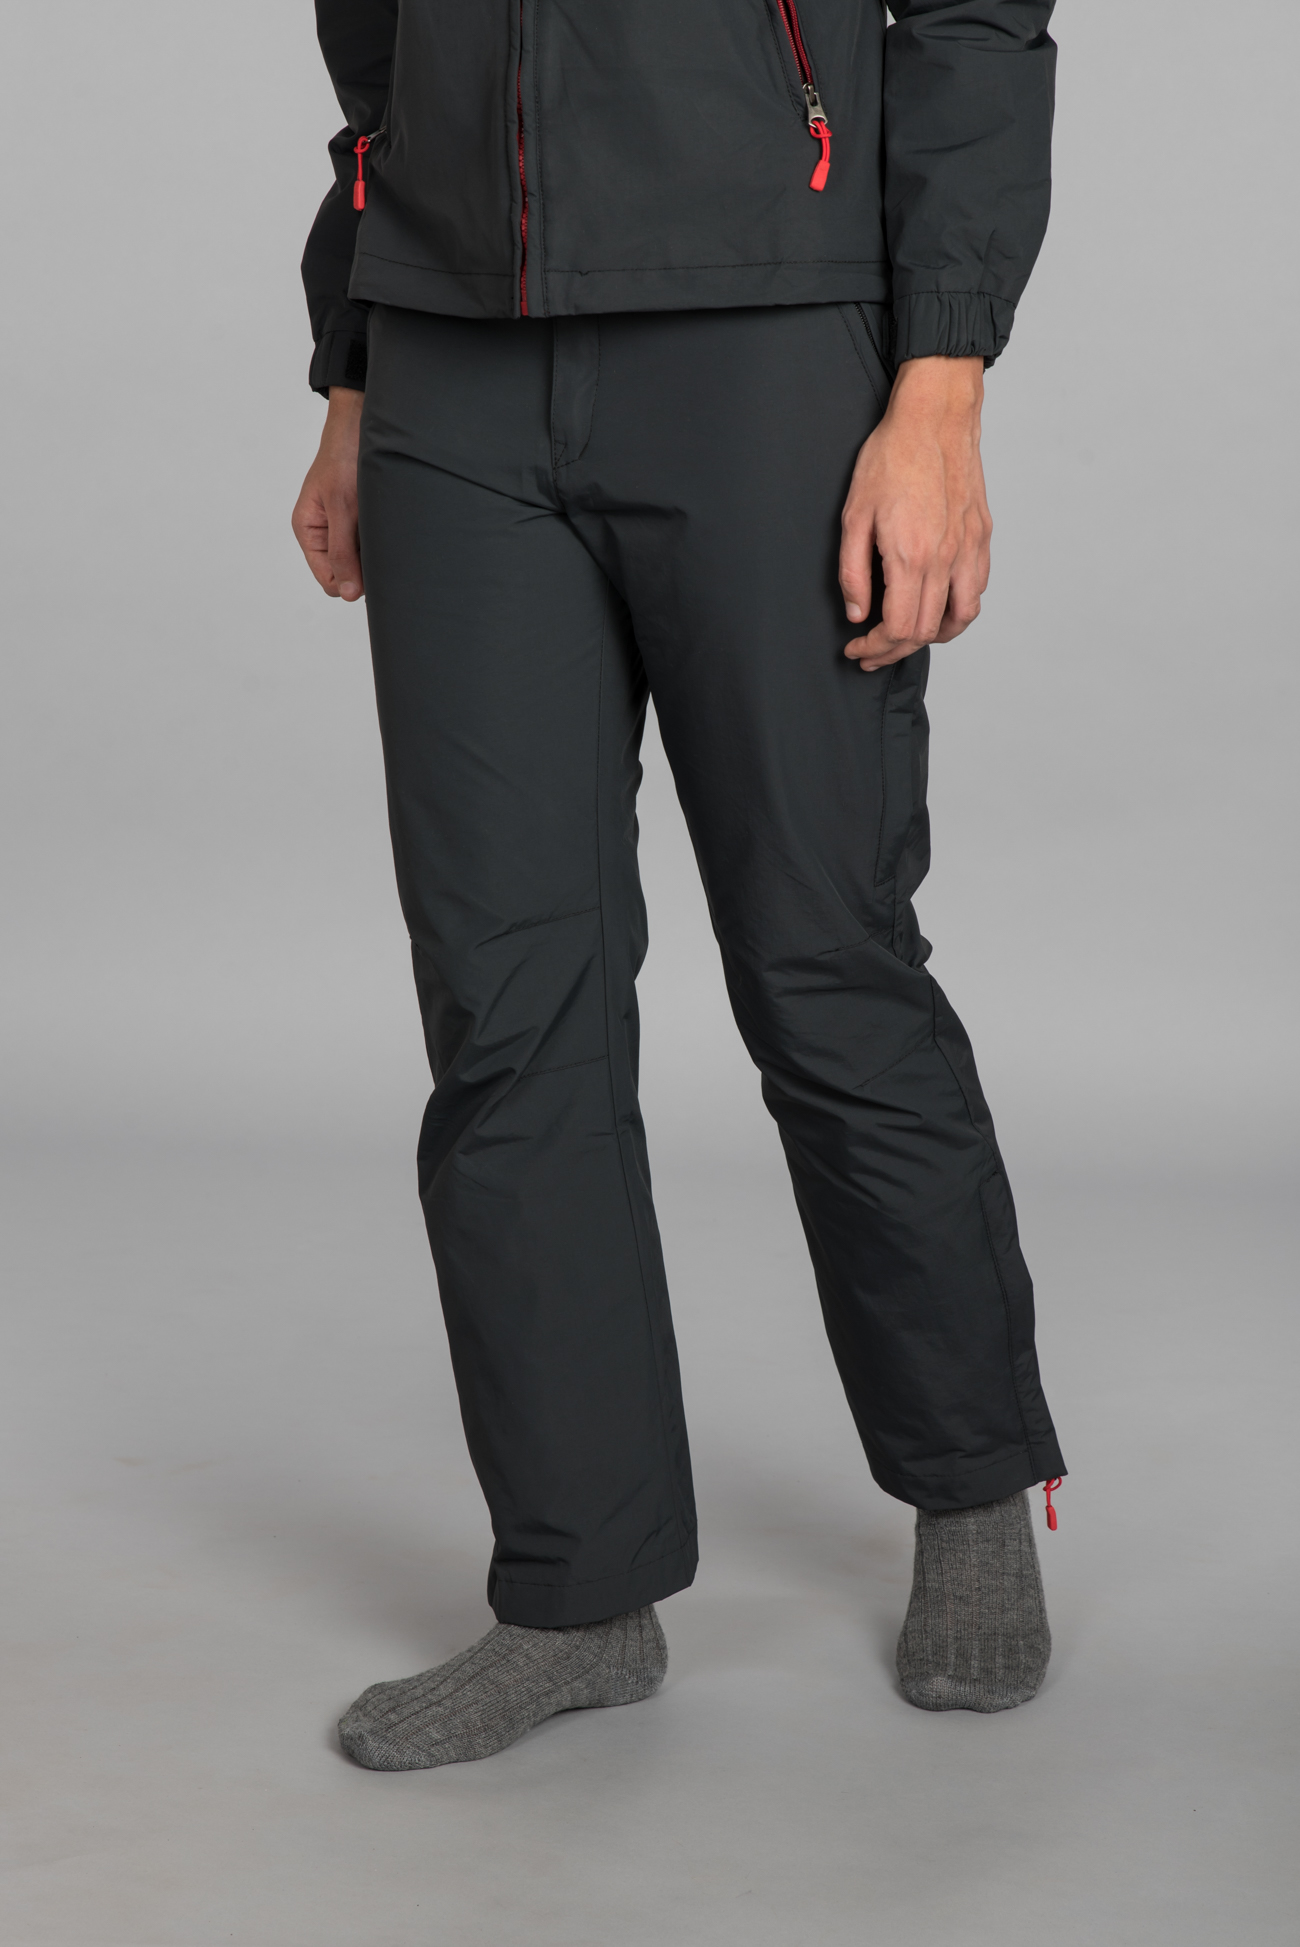 Womens Shooting Trousers  Balnecroft Country Store